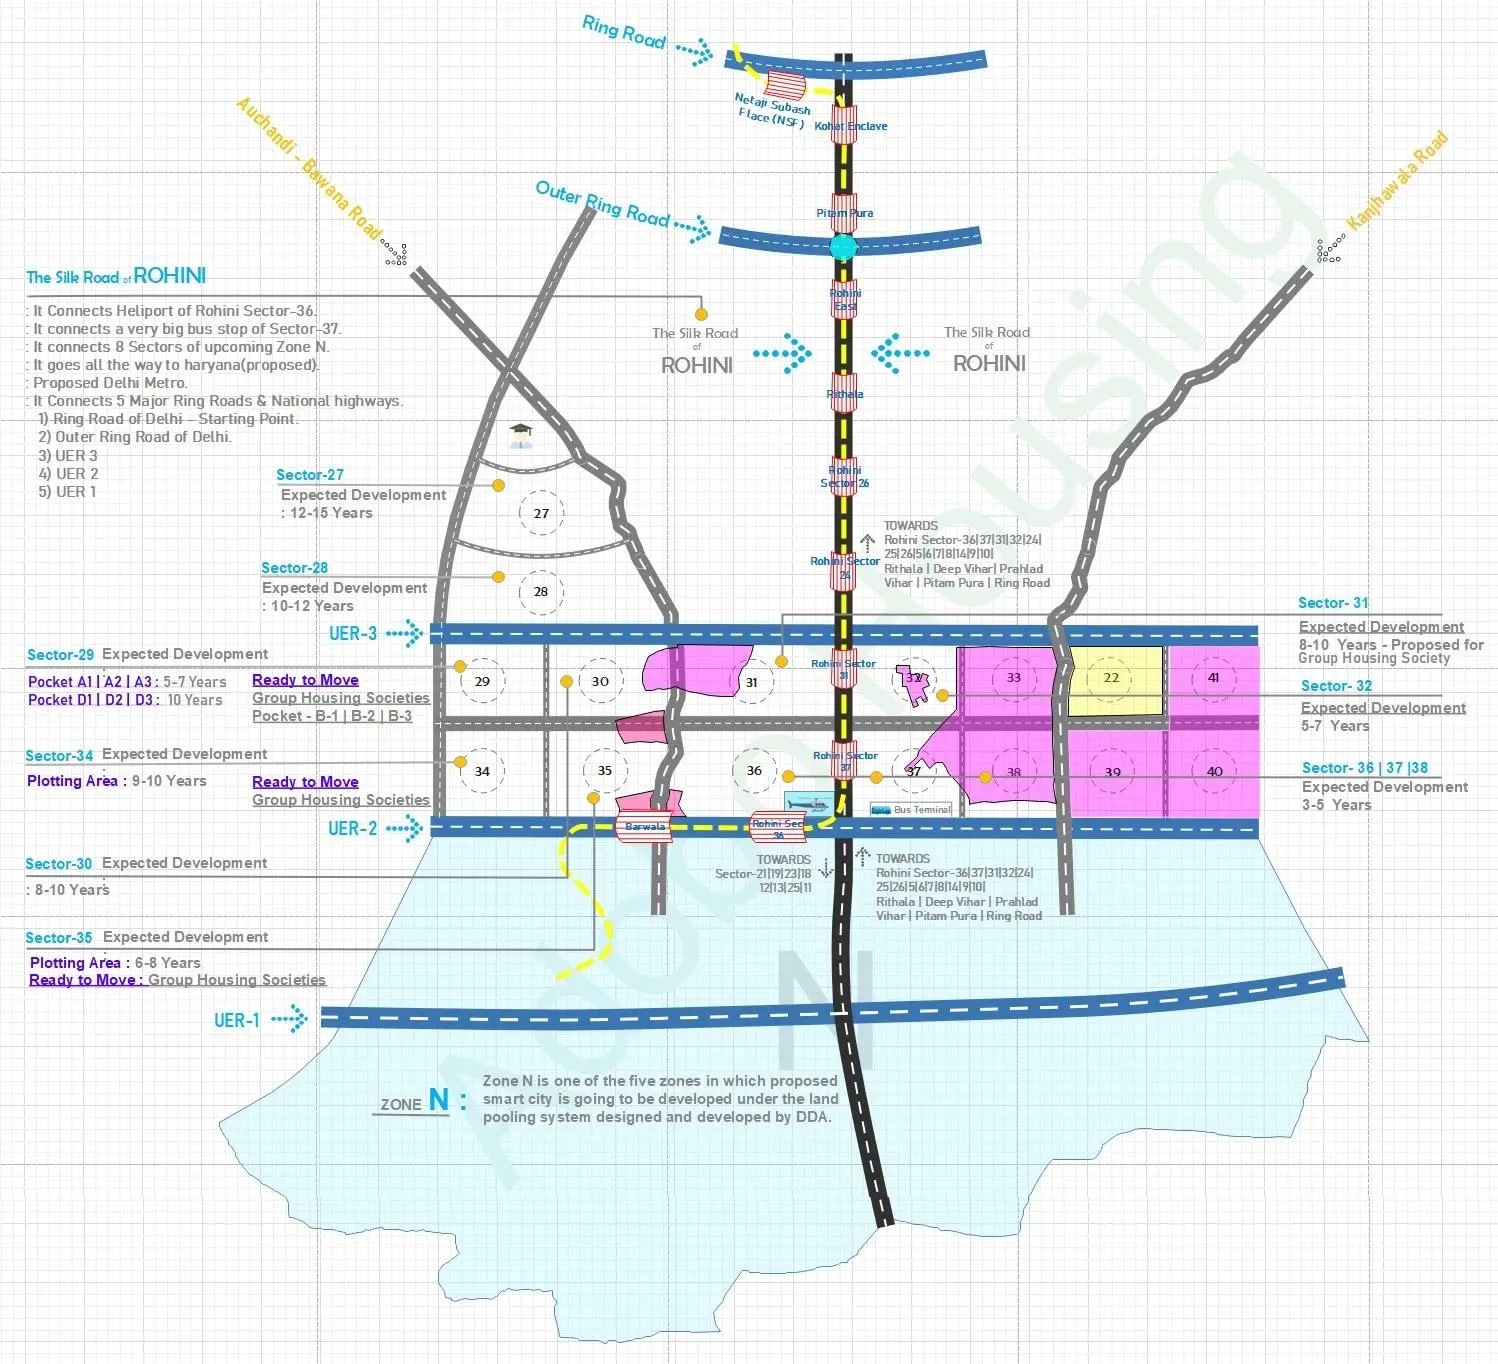 Layout plan map of Futuristic proposed and expected development of Rohini